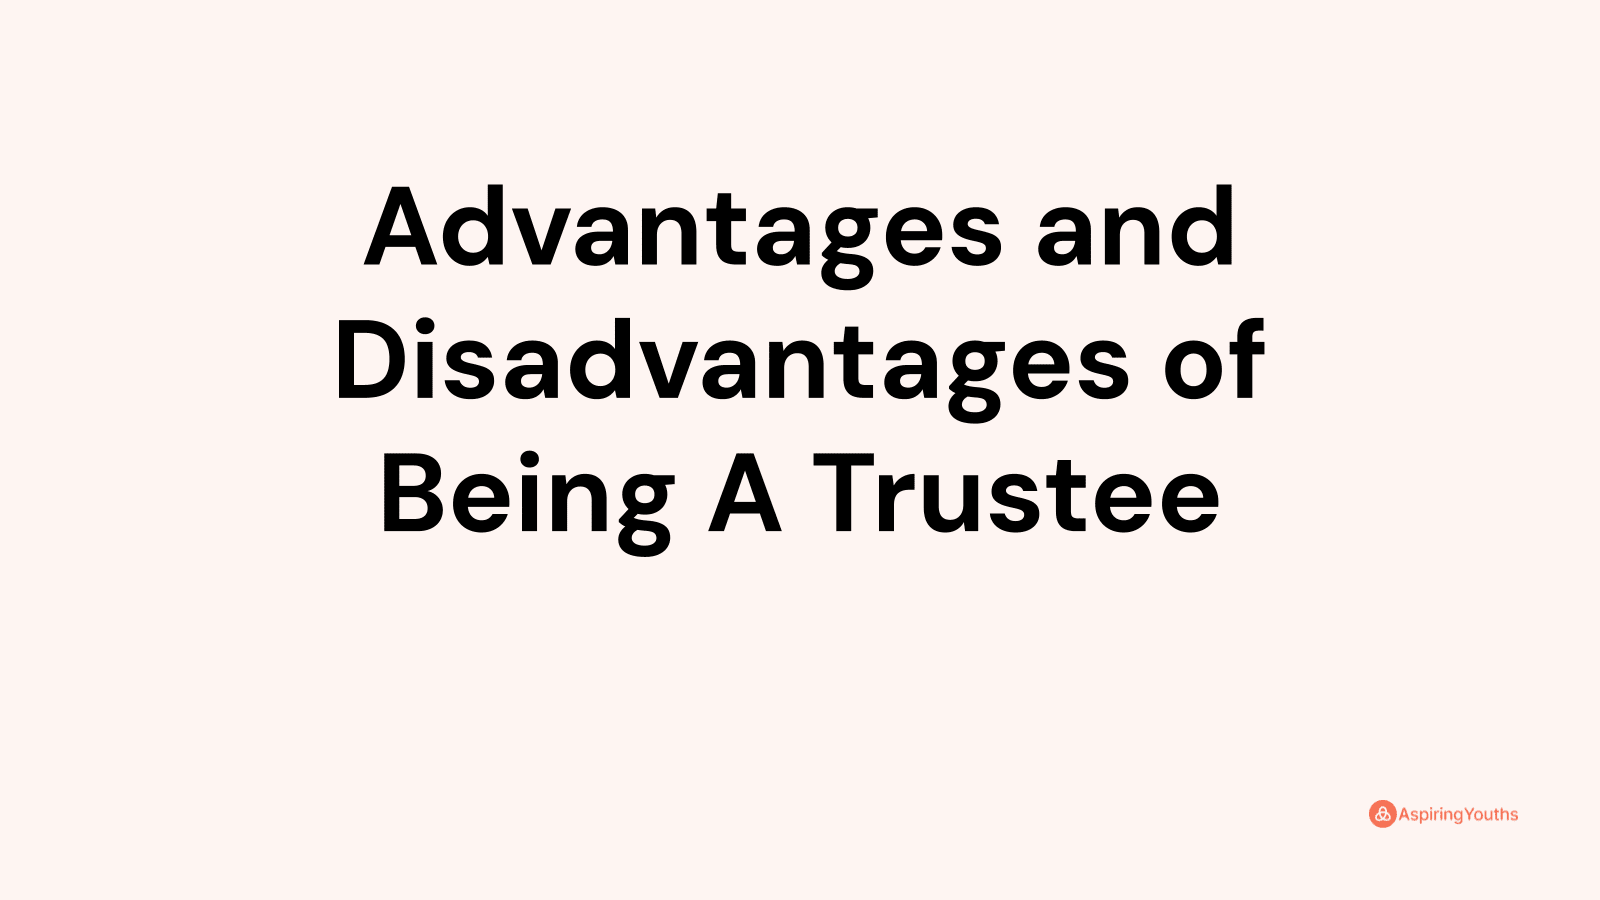 Advantages and disadvantages of Being A Trustee